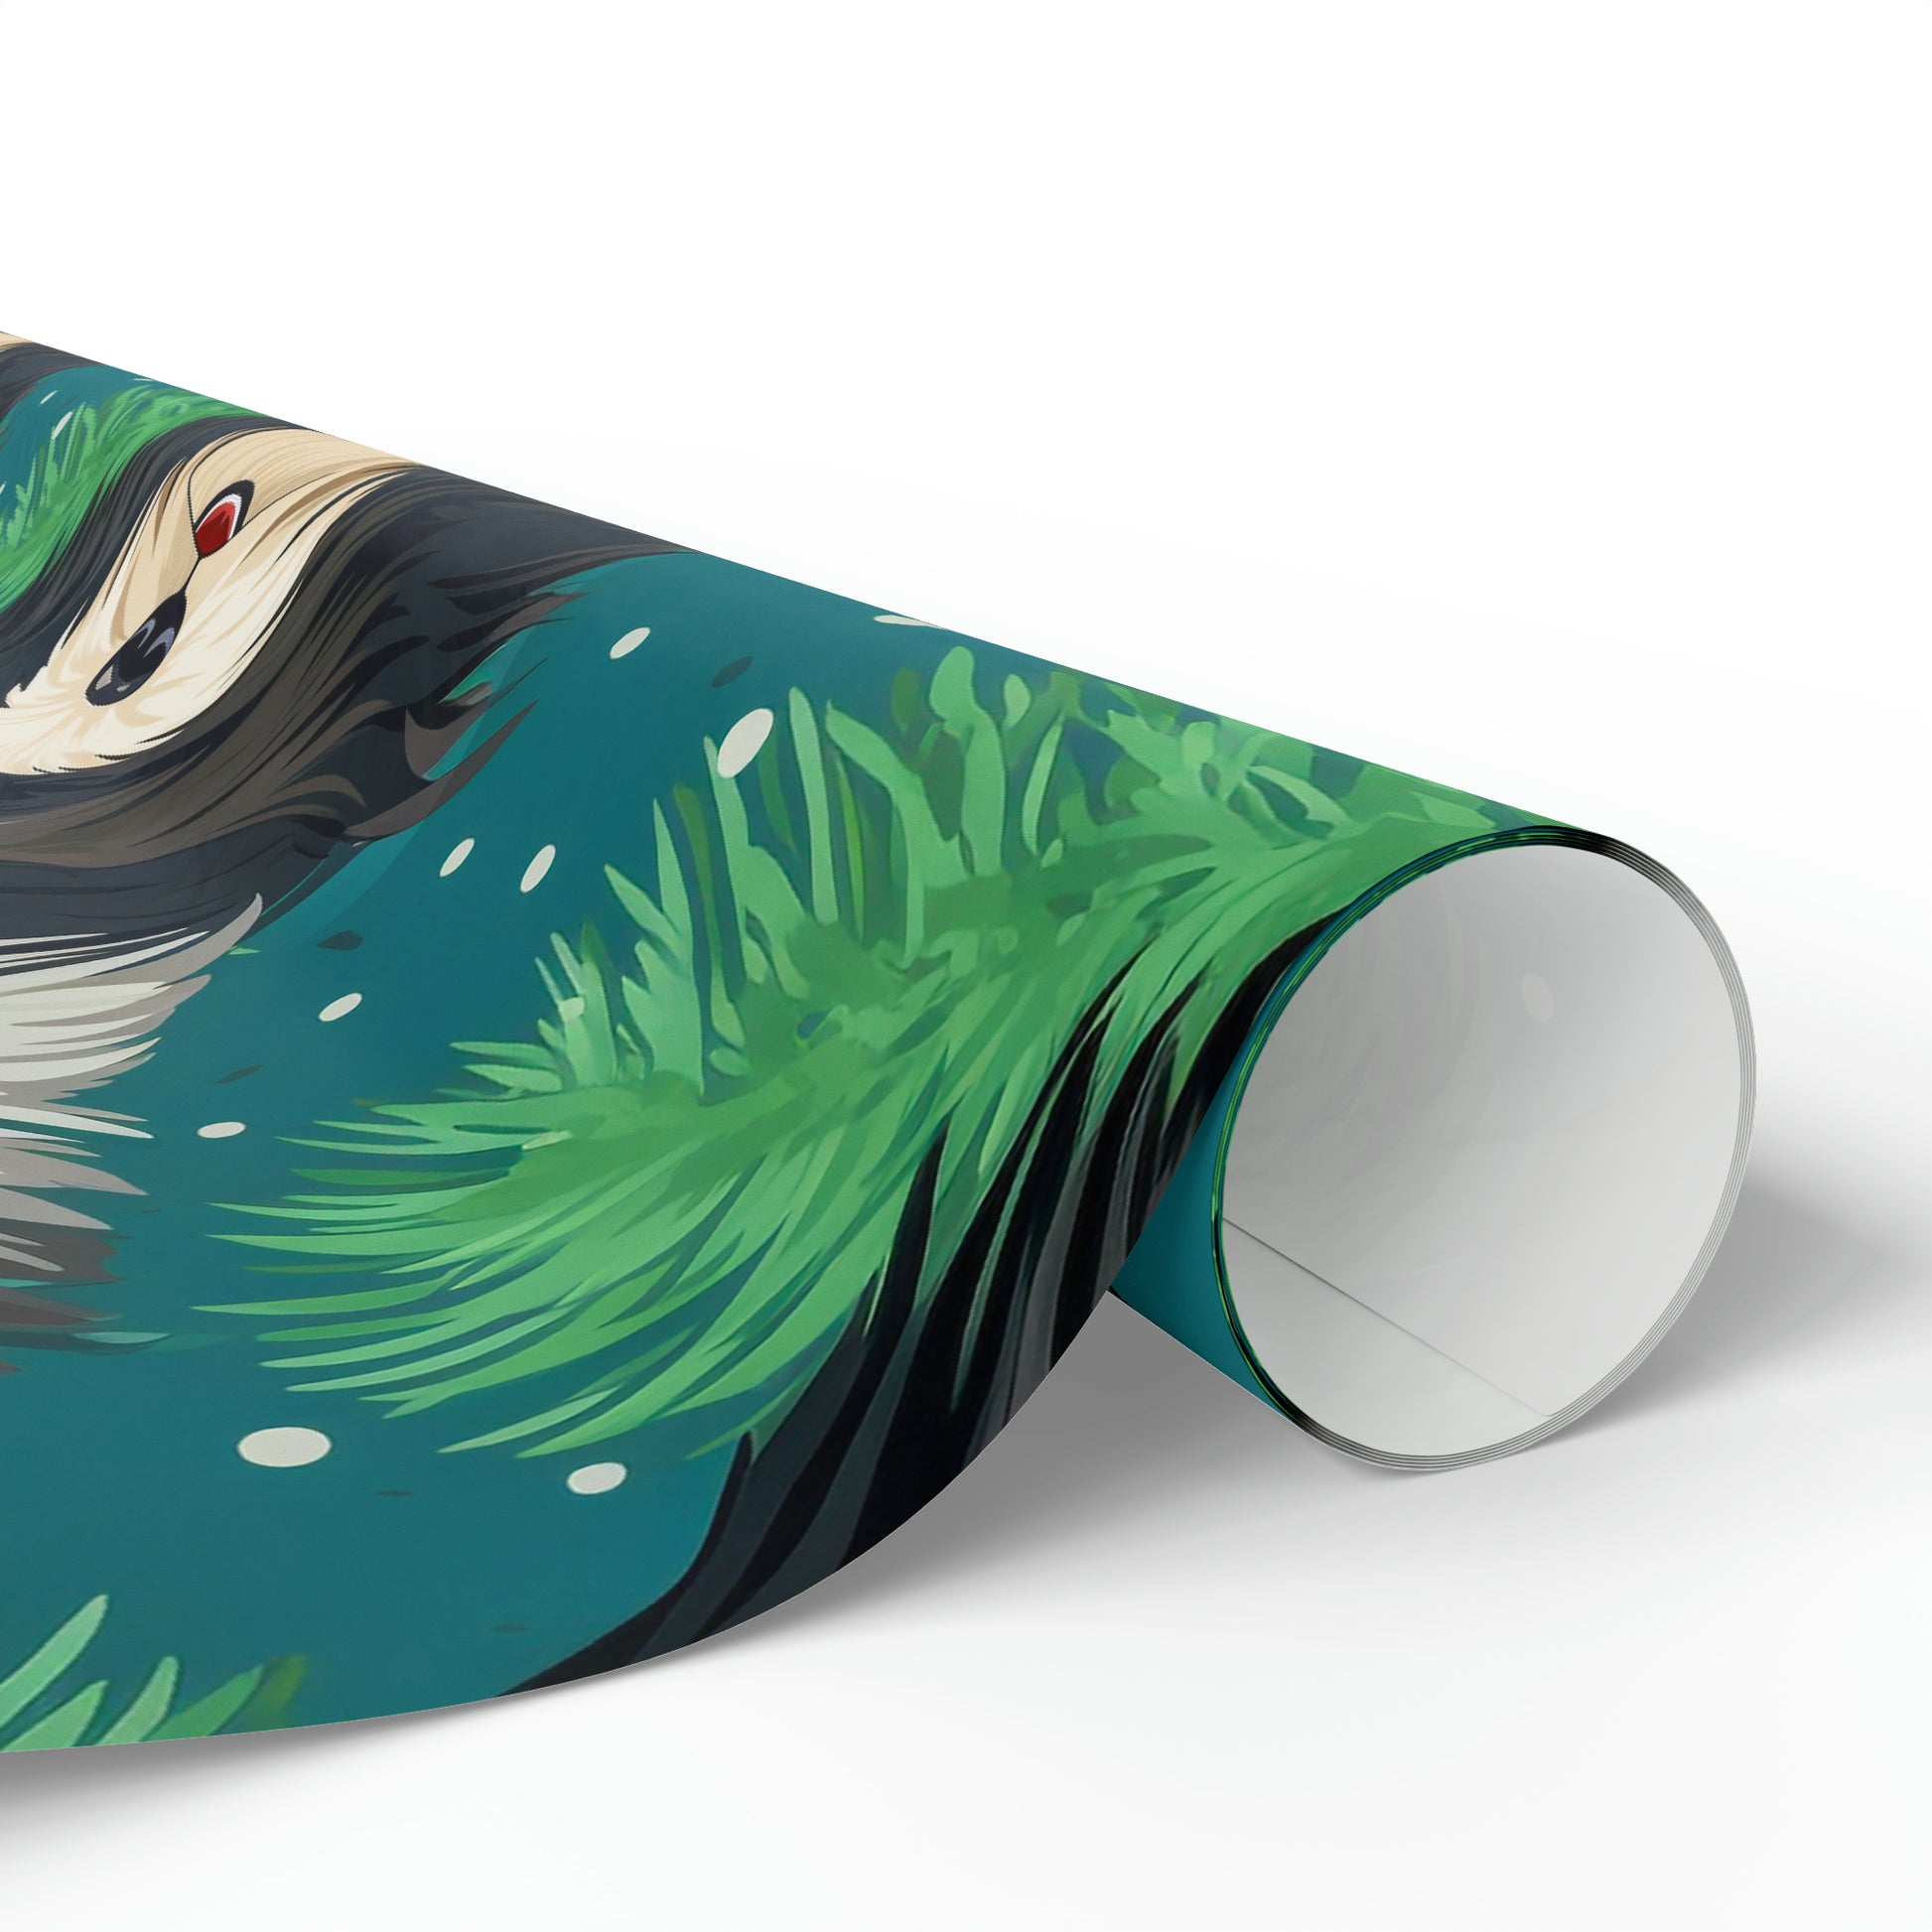 Havanese Dog Holiday Wrapping Paper Rolls - 3 Size Options from The Curated Goose